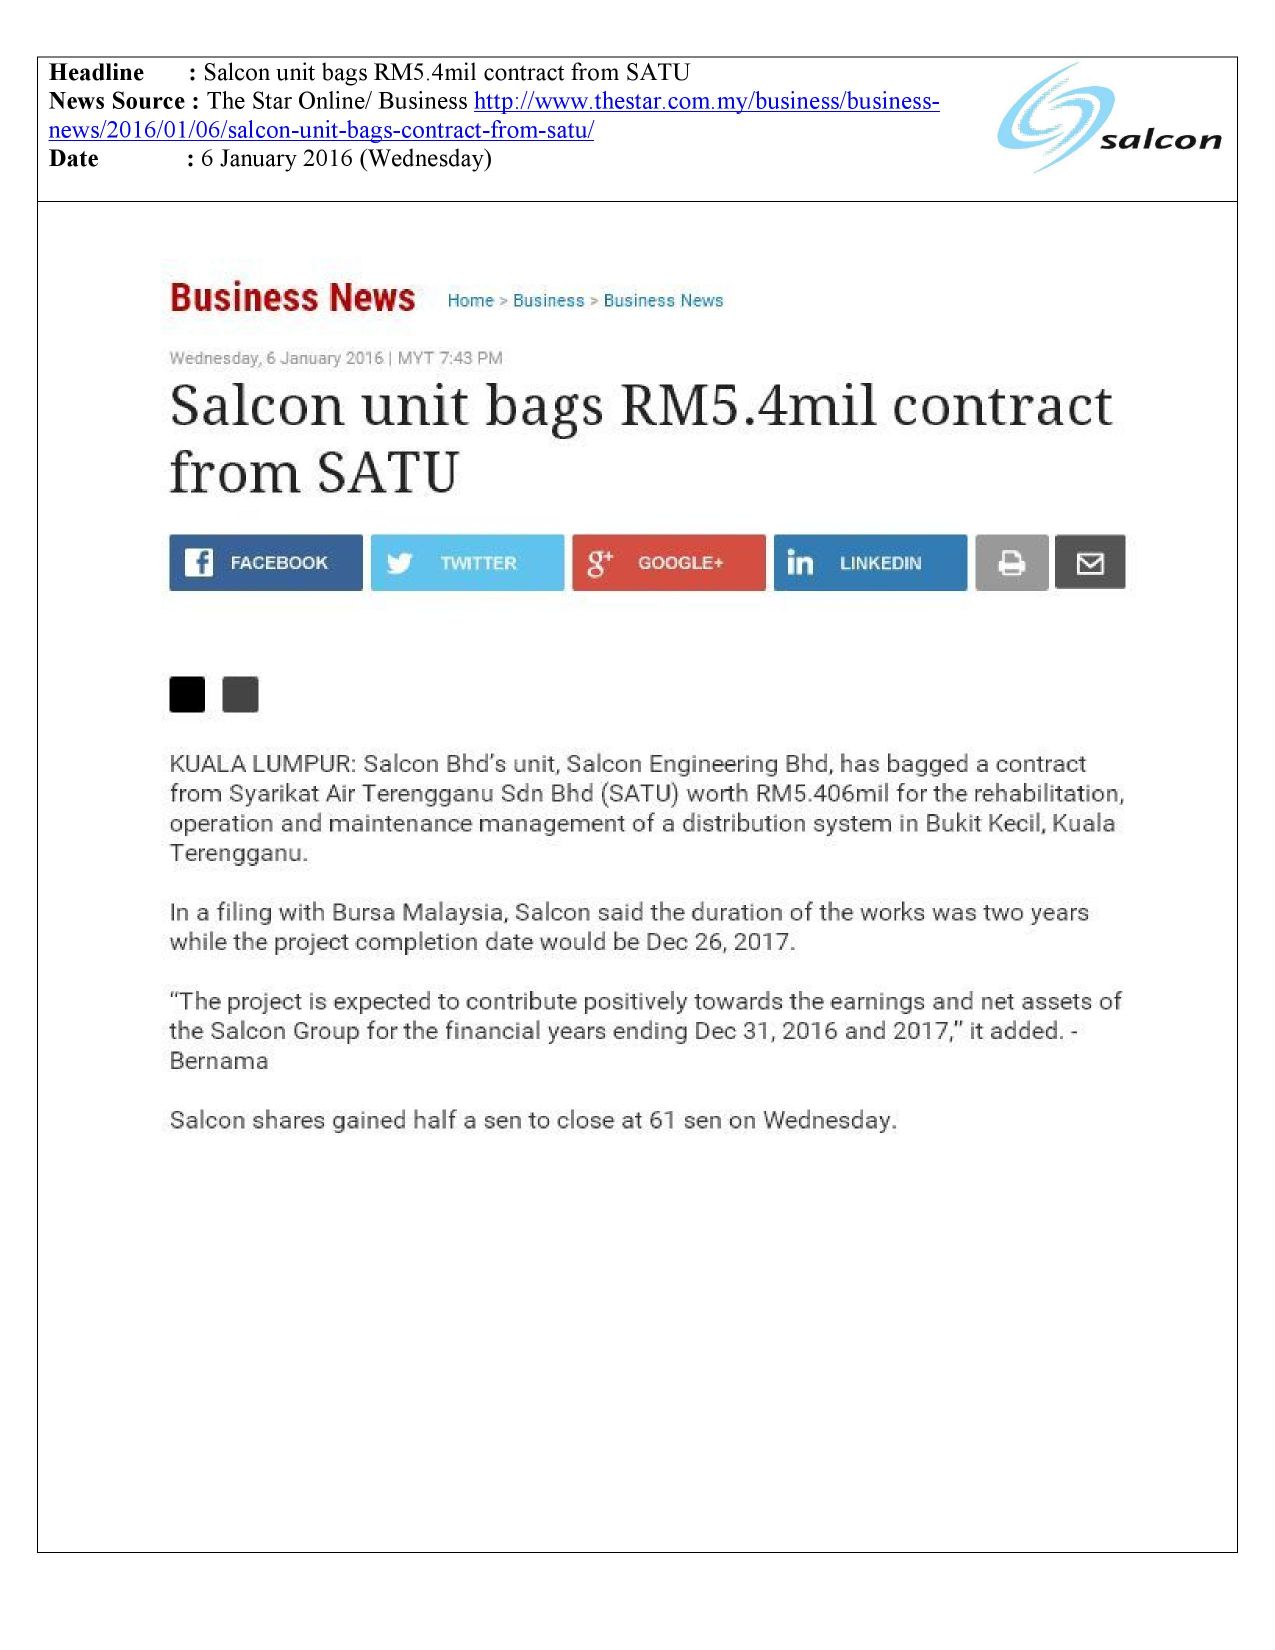 Salcon unit bags RM5.4mil contract from SATU